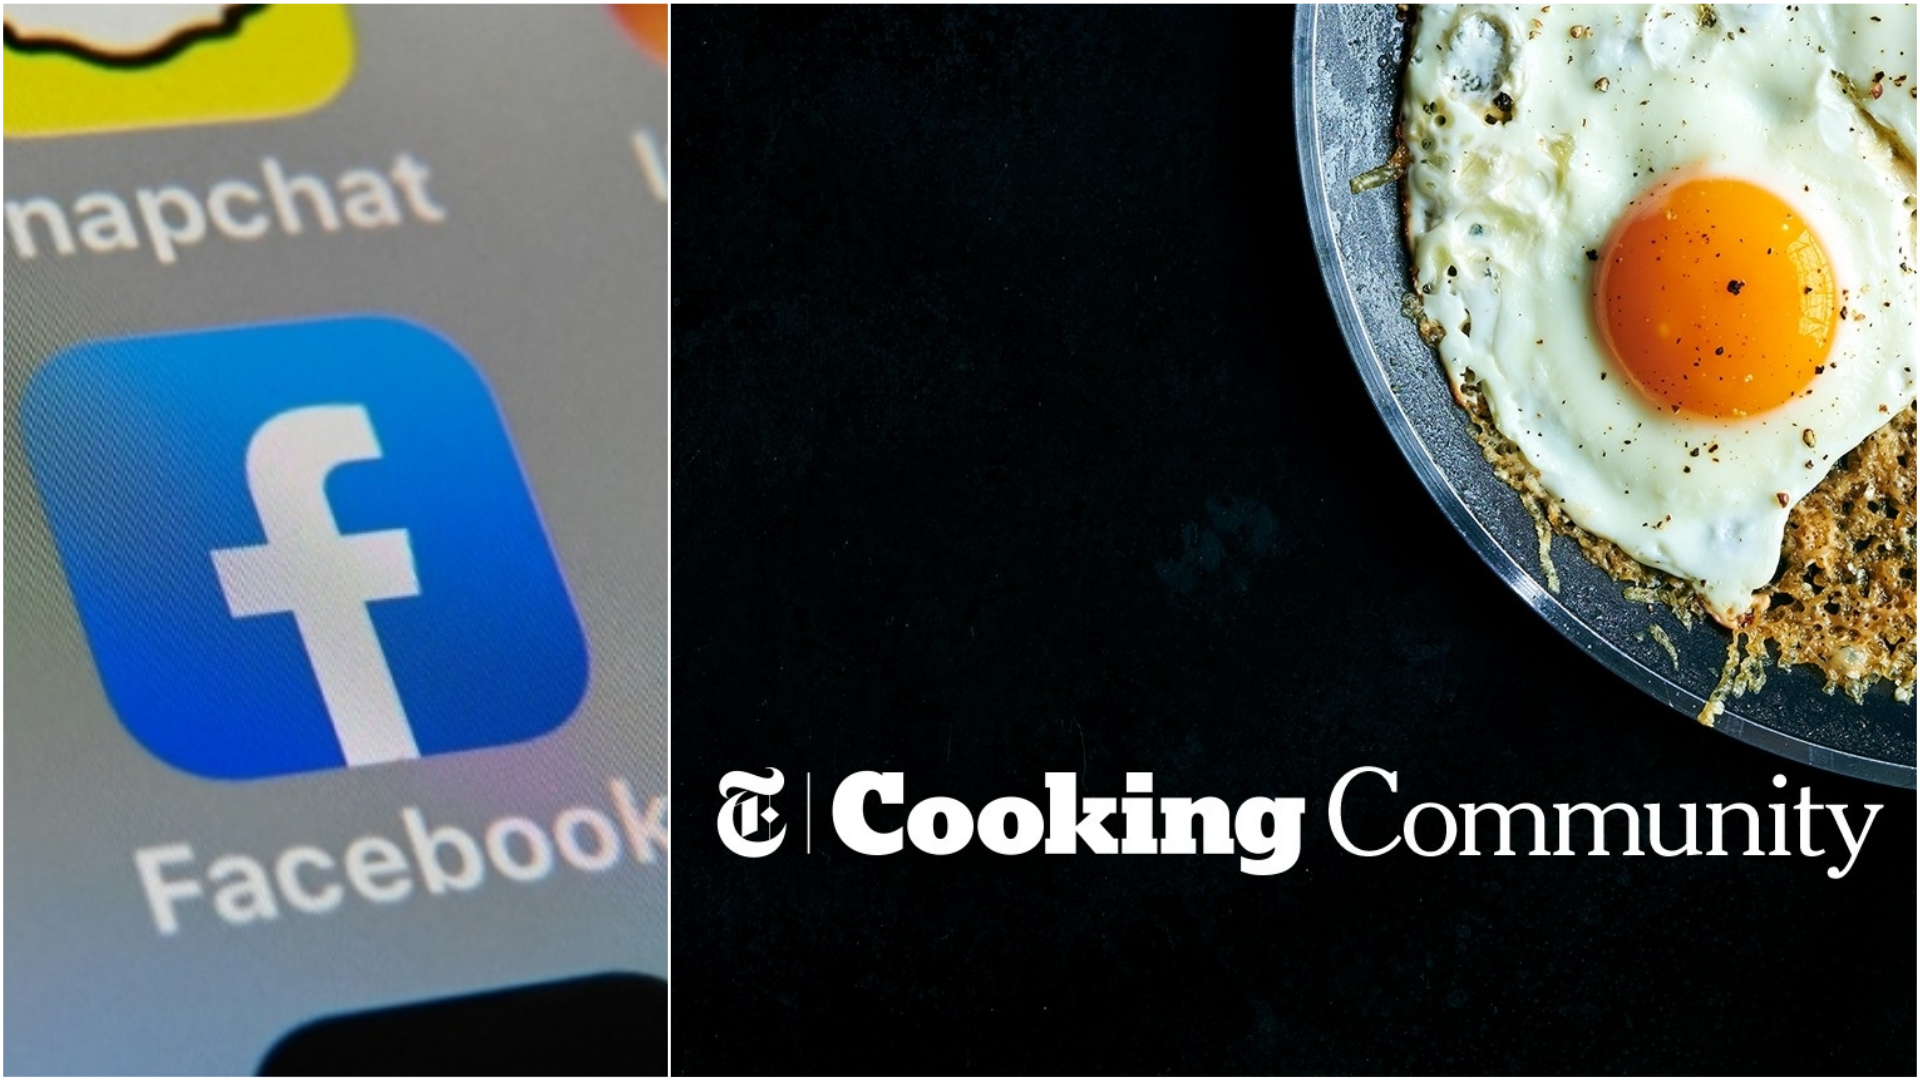 The New York Times Cooking Community